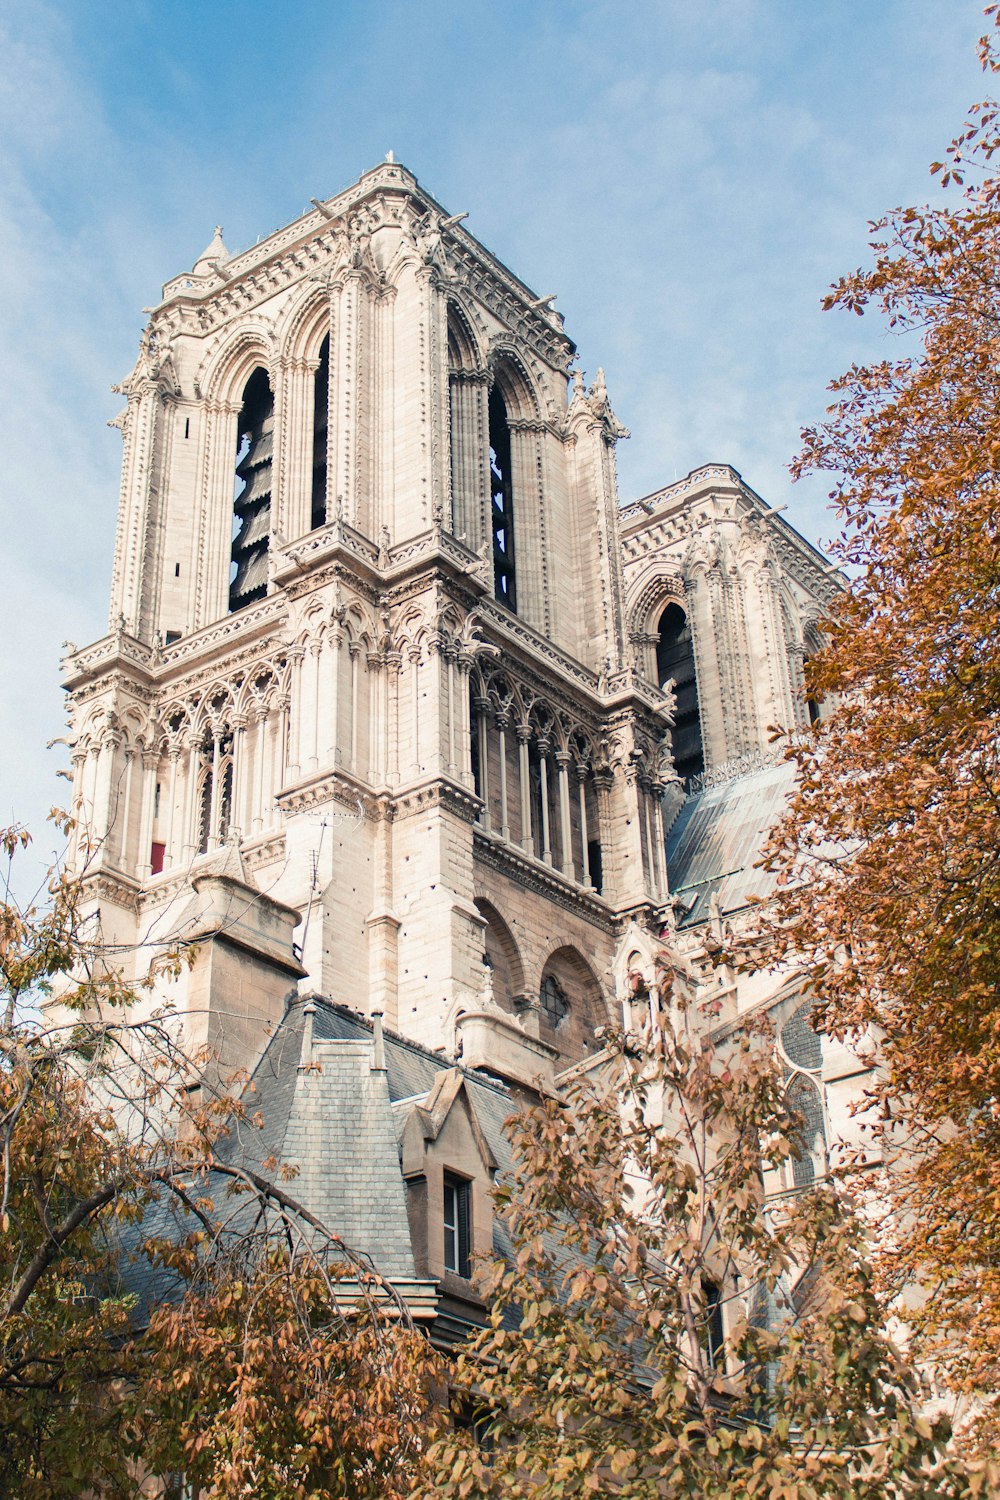 Notre Dame in Paris under blue and white skies